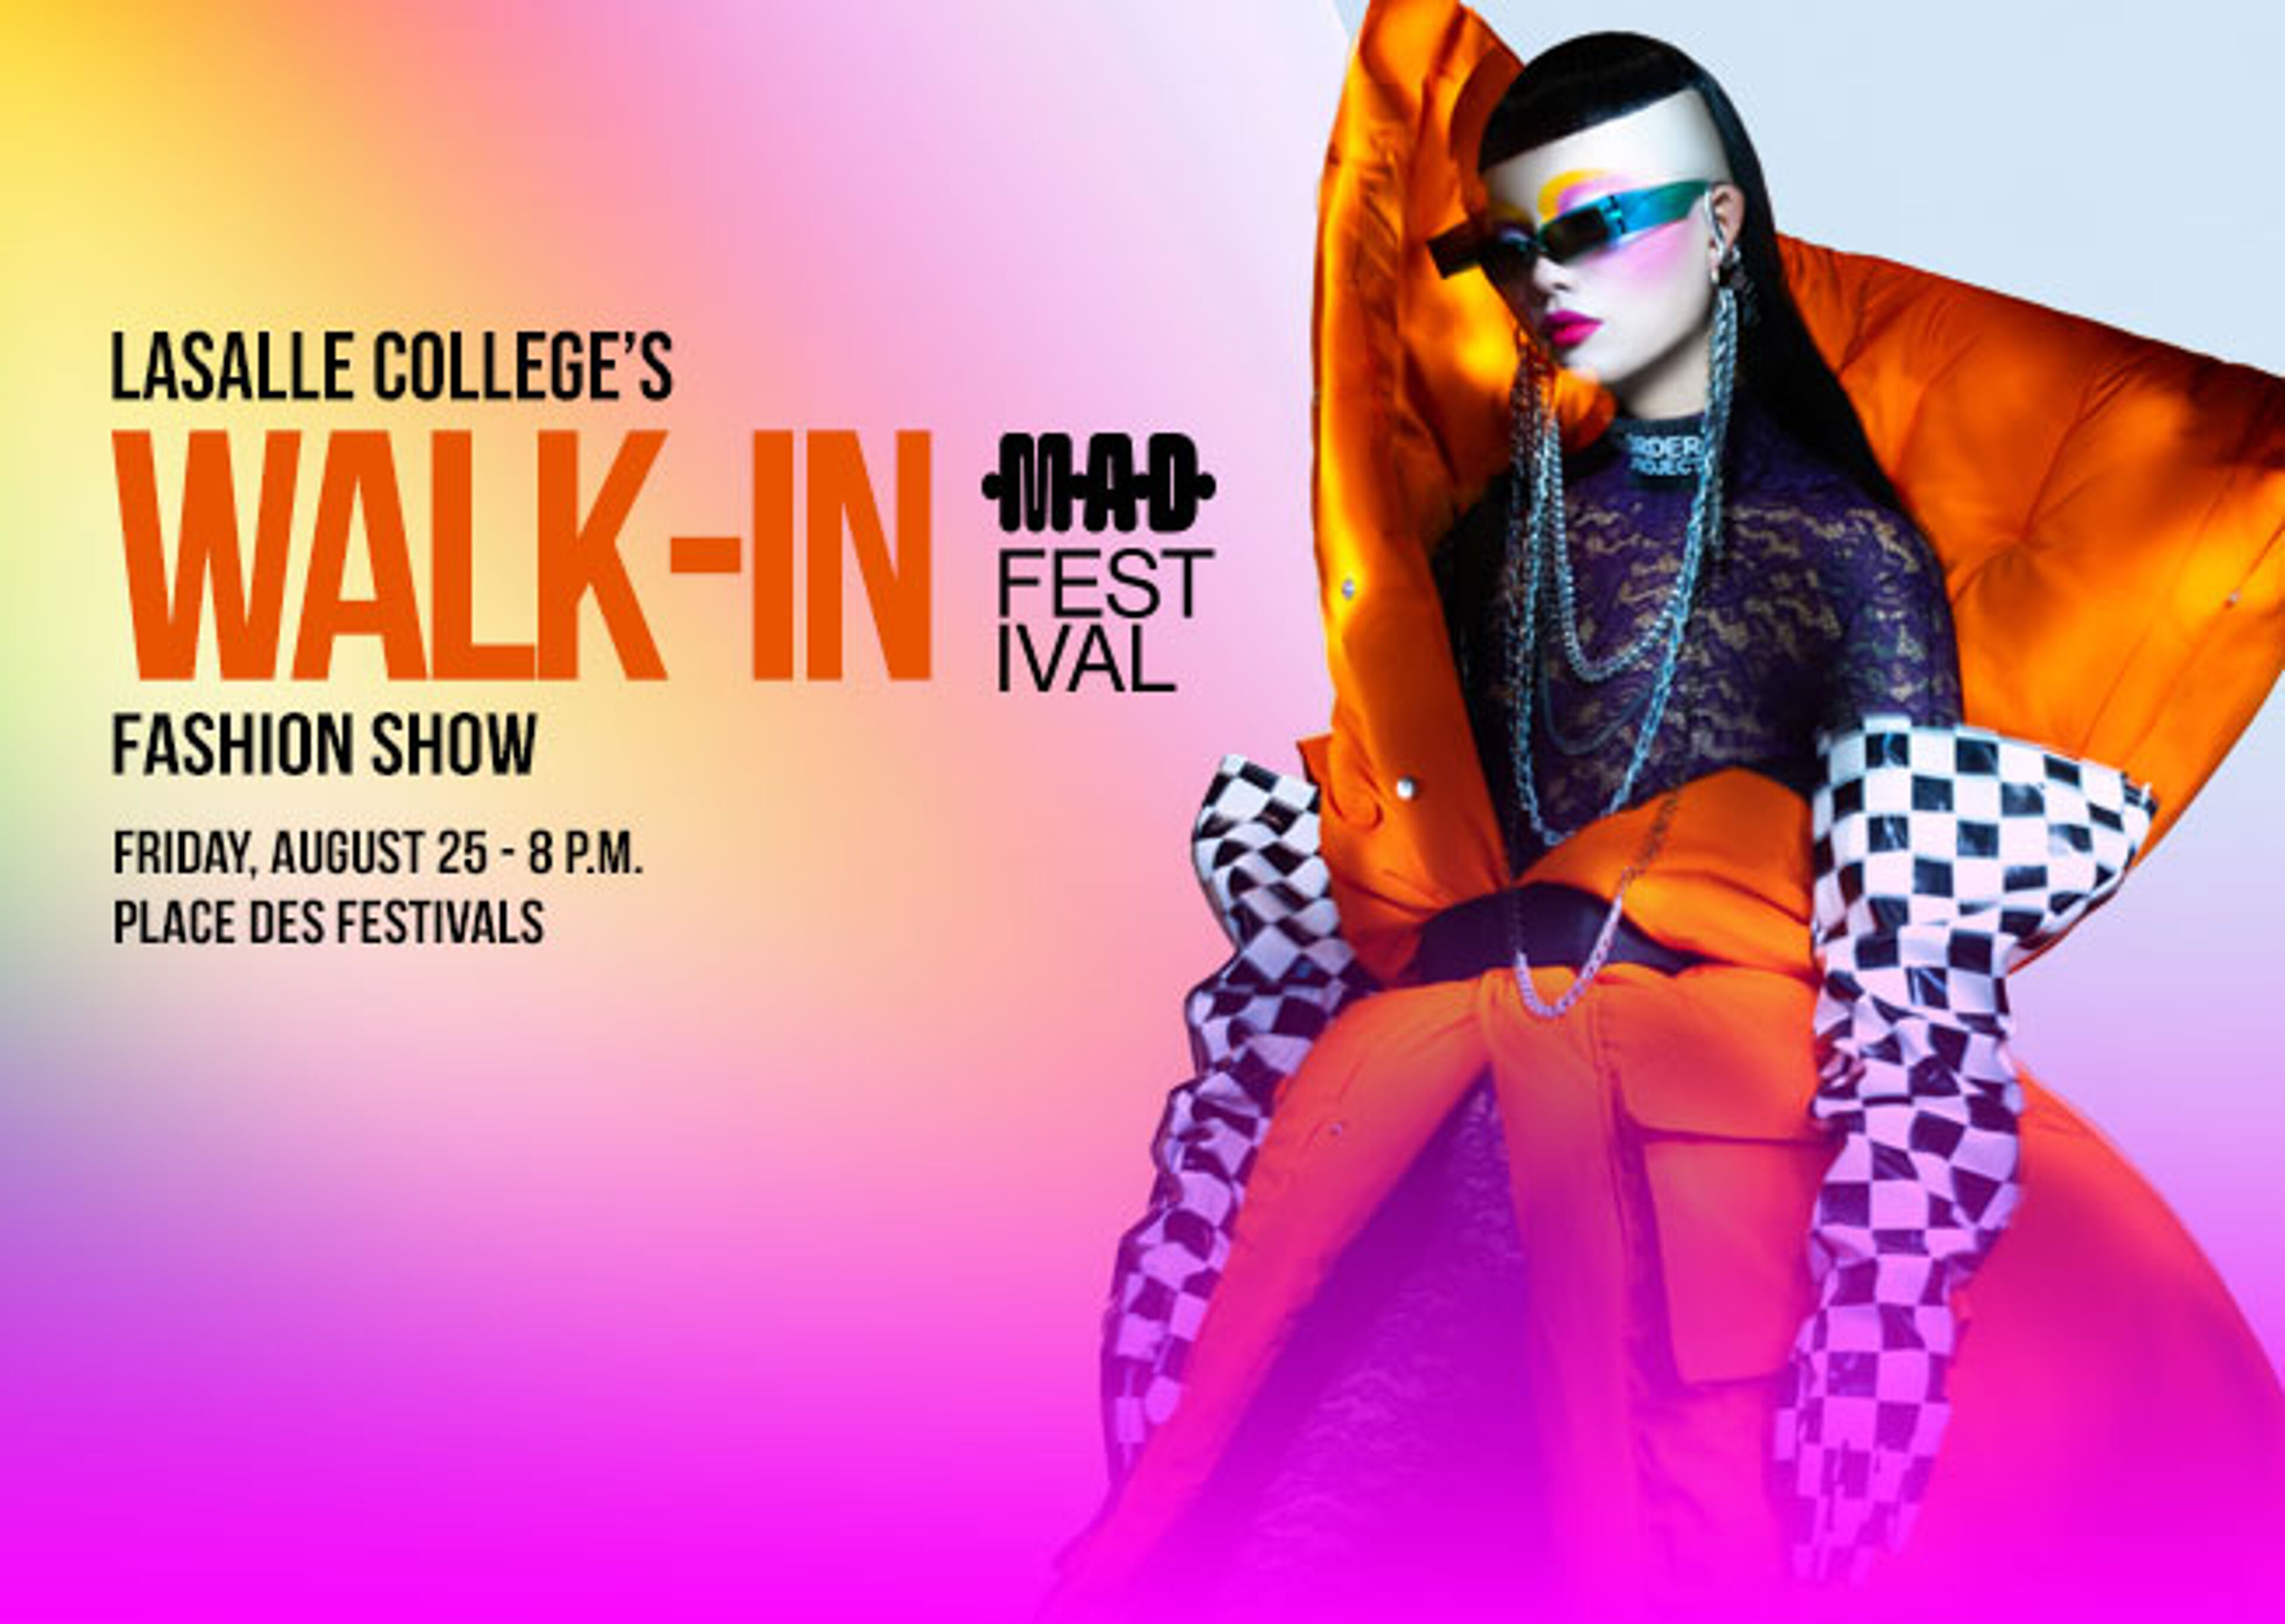 Promotional poster for LaSalle College's WALK-IN fashion show, featuring a model in bold outfit.